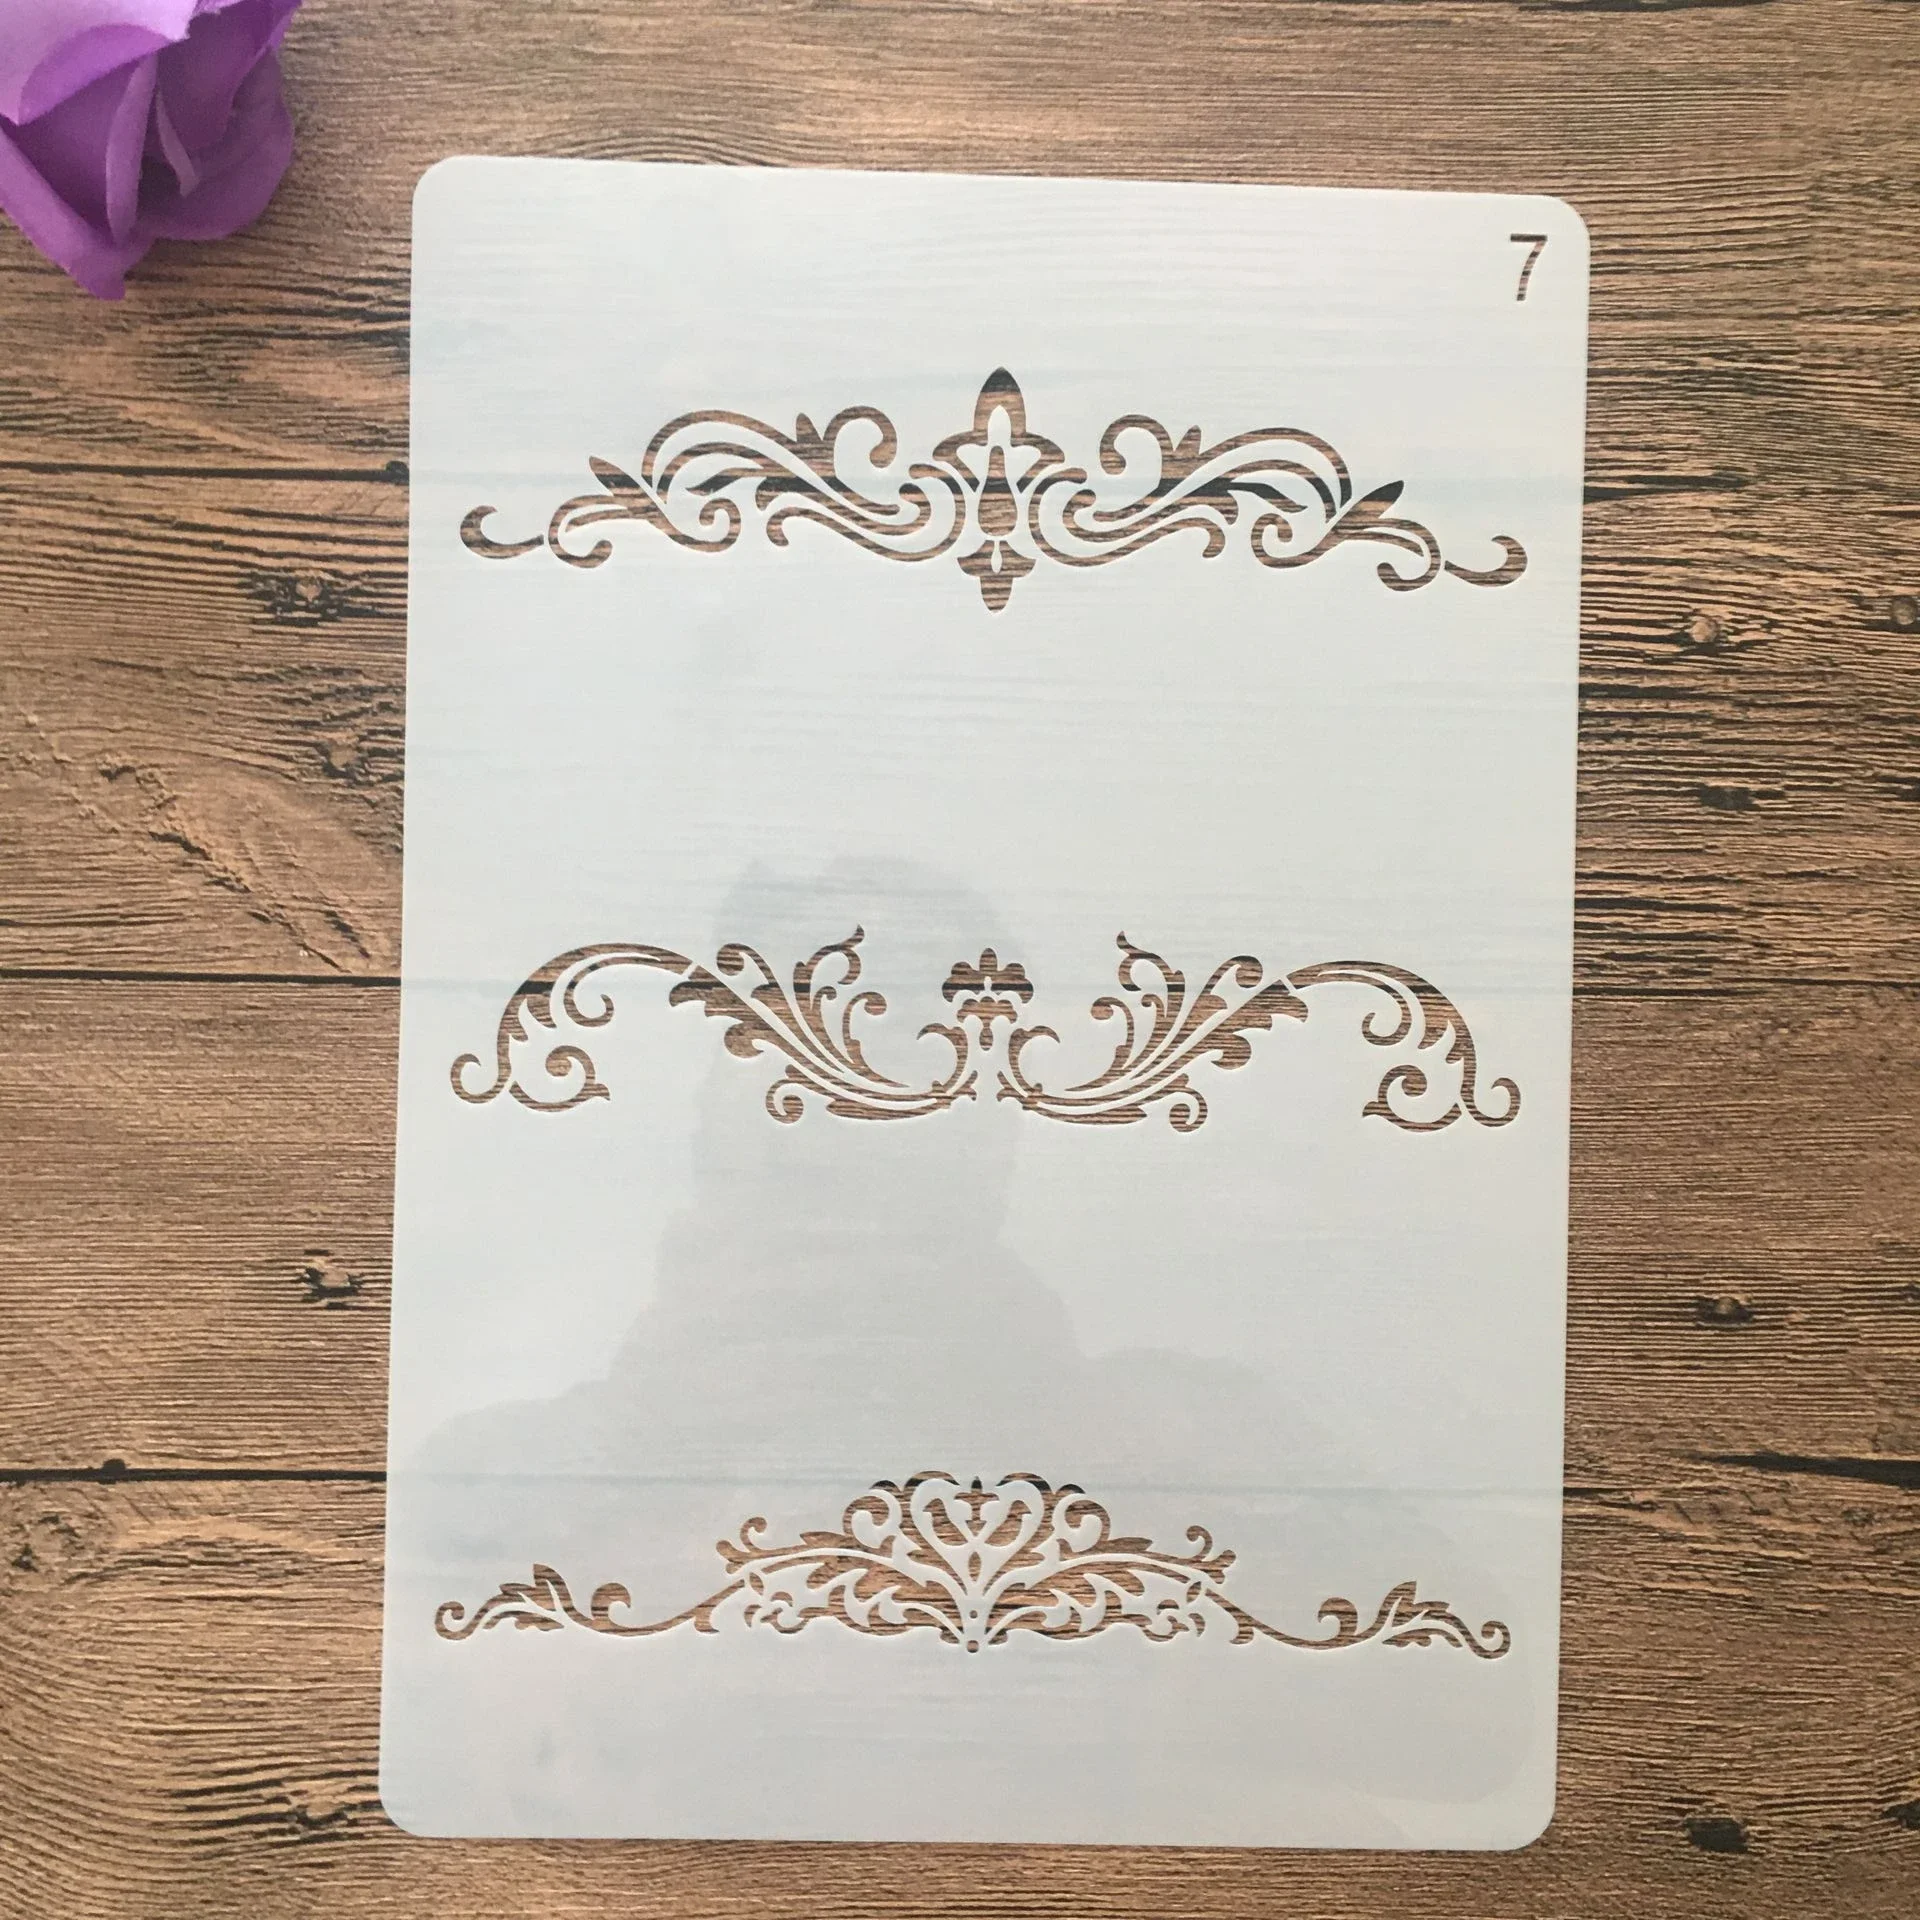 A4 29 * 21cm Crown Flower wall layered stencil painting scrapbook stamp album decoration embossed paper card template decoration custom high quality custom gold foil art paper floral logo flower embossed business postcard wedding card thank you card for sup